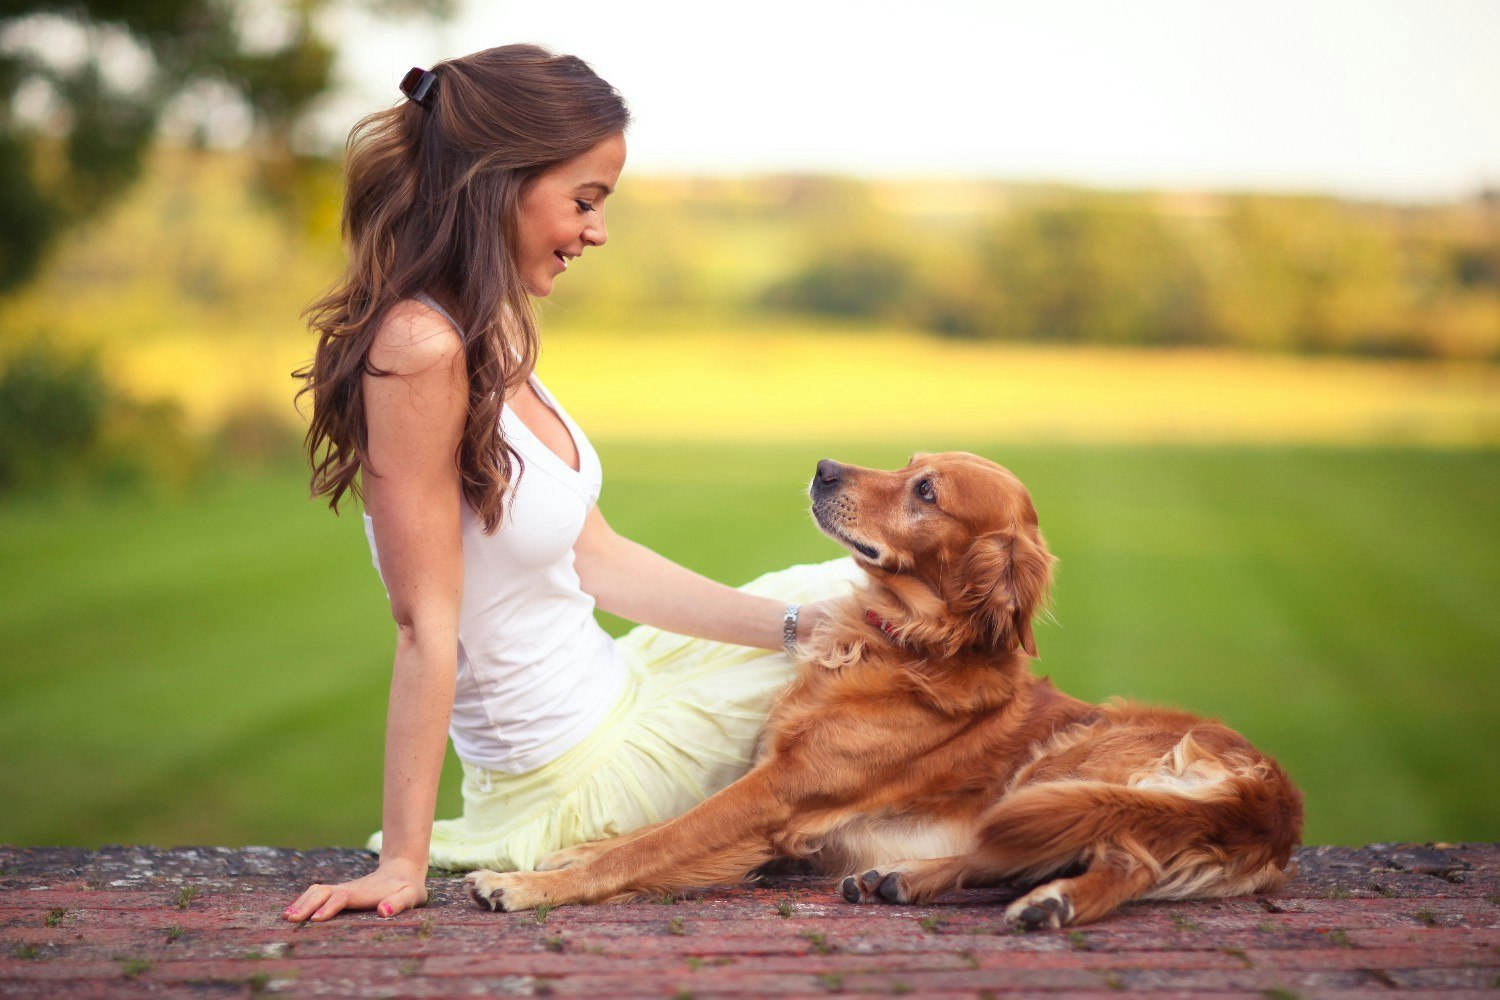 A girl and her dog sitting on the ground with a green field behind them